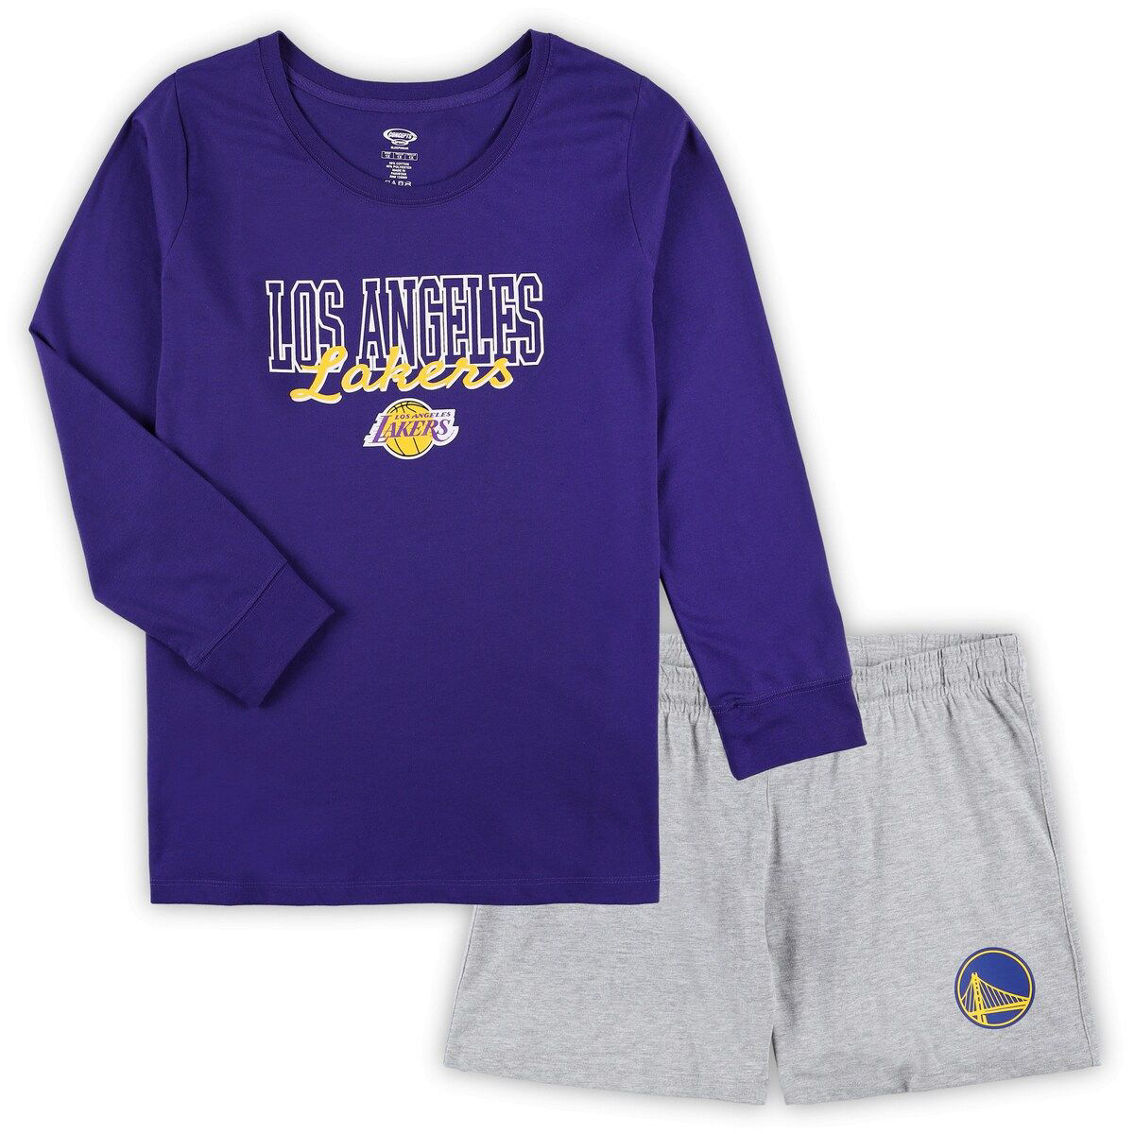 Concepts Sport Women's Purple/Heather Gray Los Angeles Lakers Plus Size Long Sleeve T-Shirt and Shorts Sleep Set - Image 2 of 4